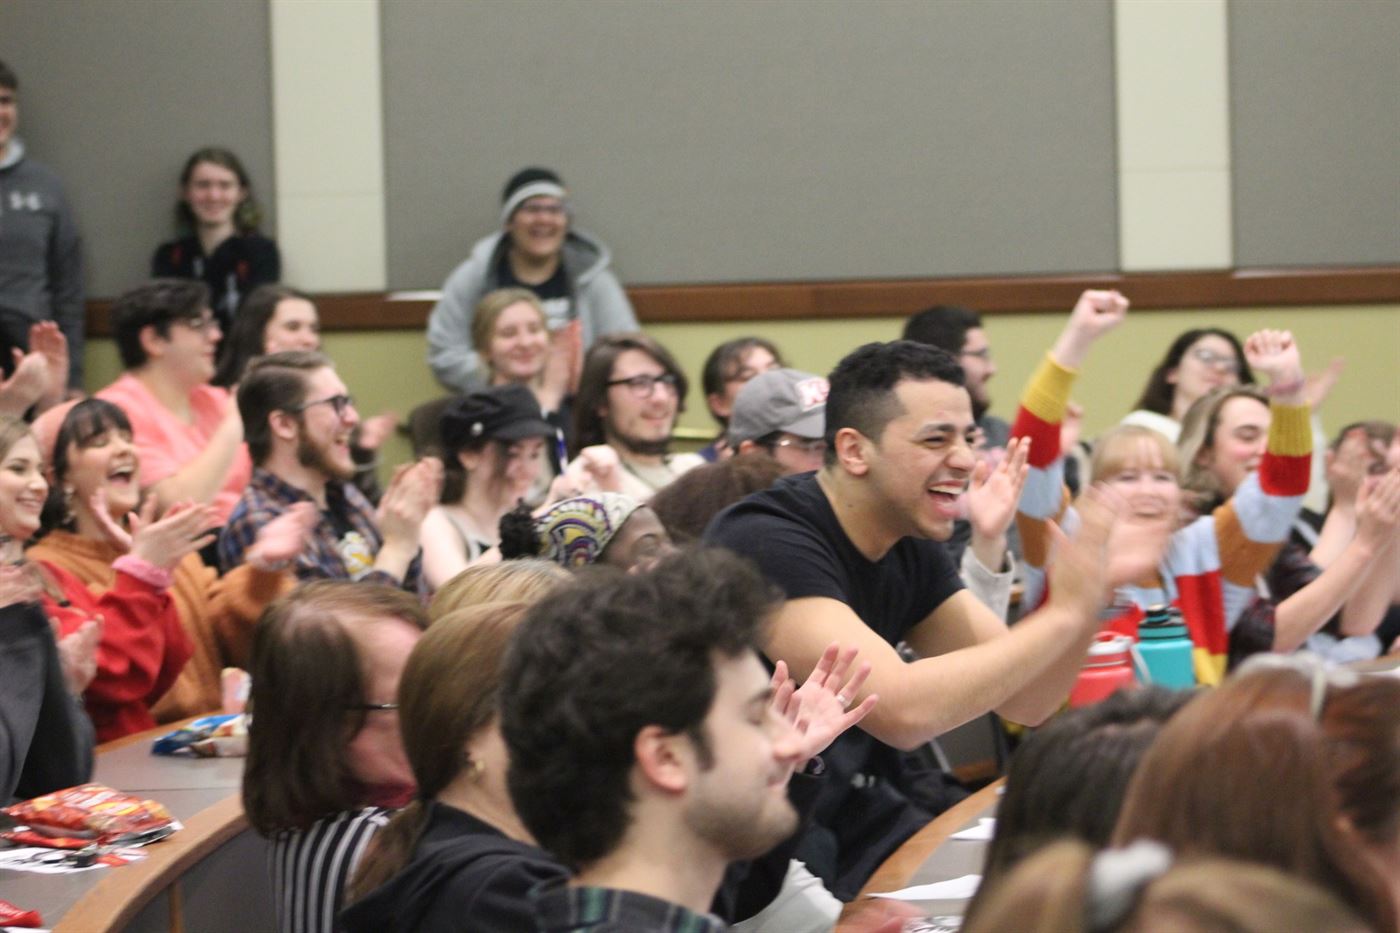 The audience had a hoot and a holler in University Hall this past weekend. Kyra Maffia | The Montclarion